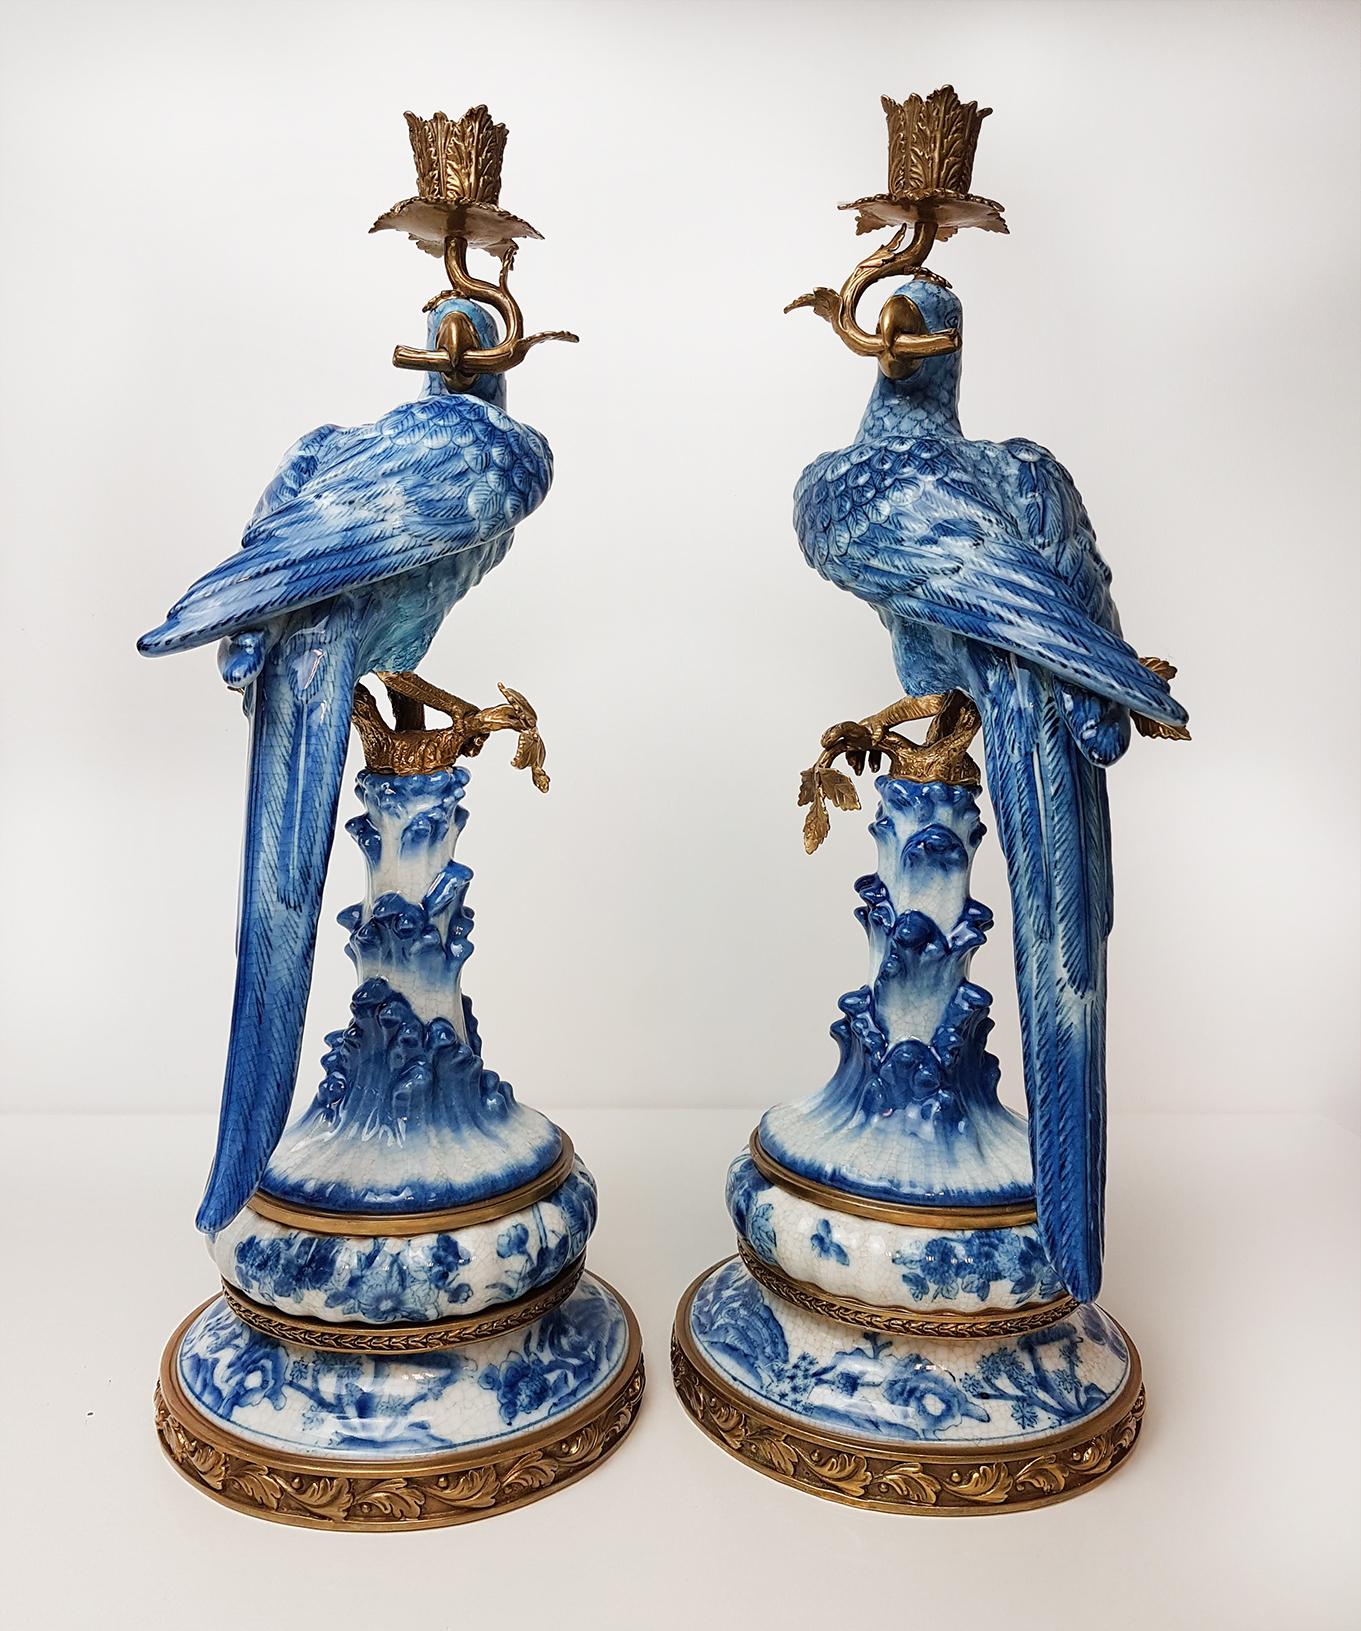 20th century pair of gilt bronze based porcelain pair blue and white parrot candlesticks.
Beautiful hand painted, left and a right orientated parrot candlesticks, almost identical.

The parrots hold bronze 